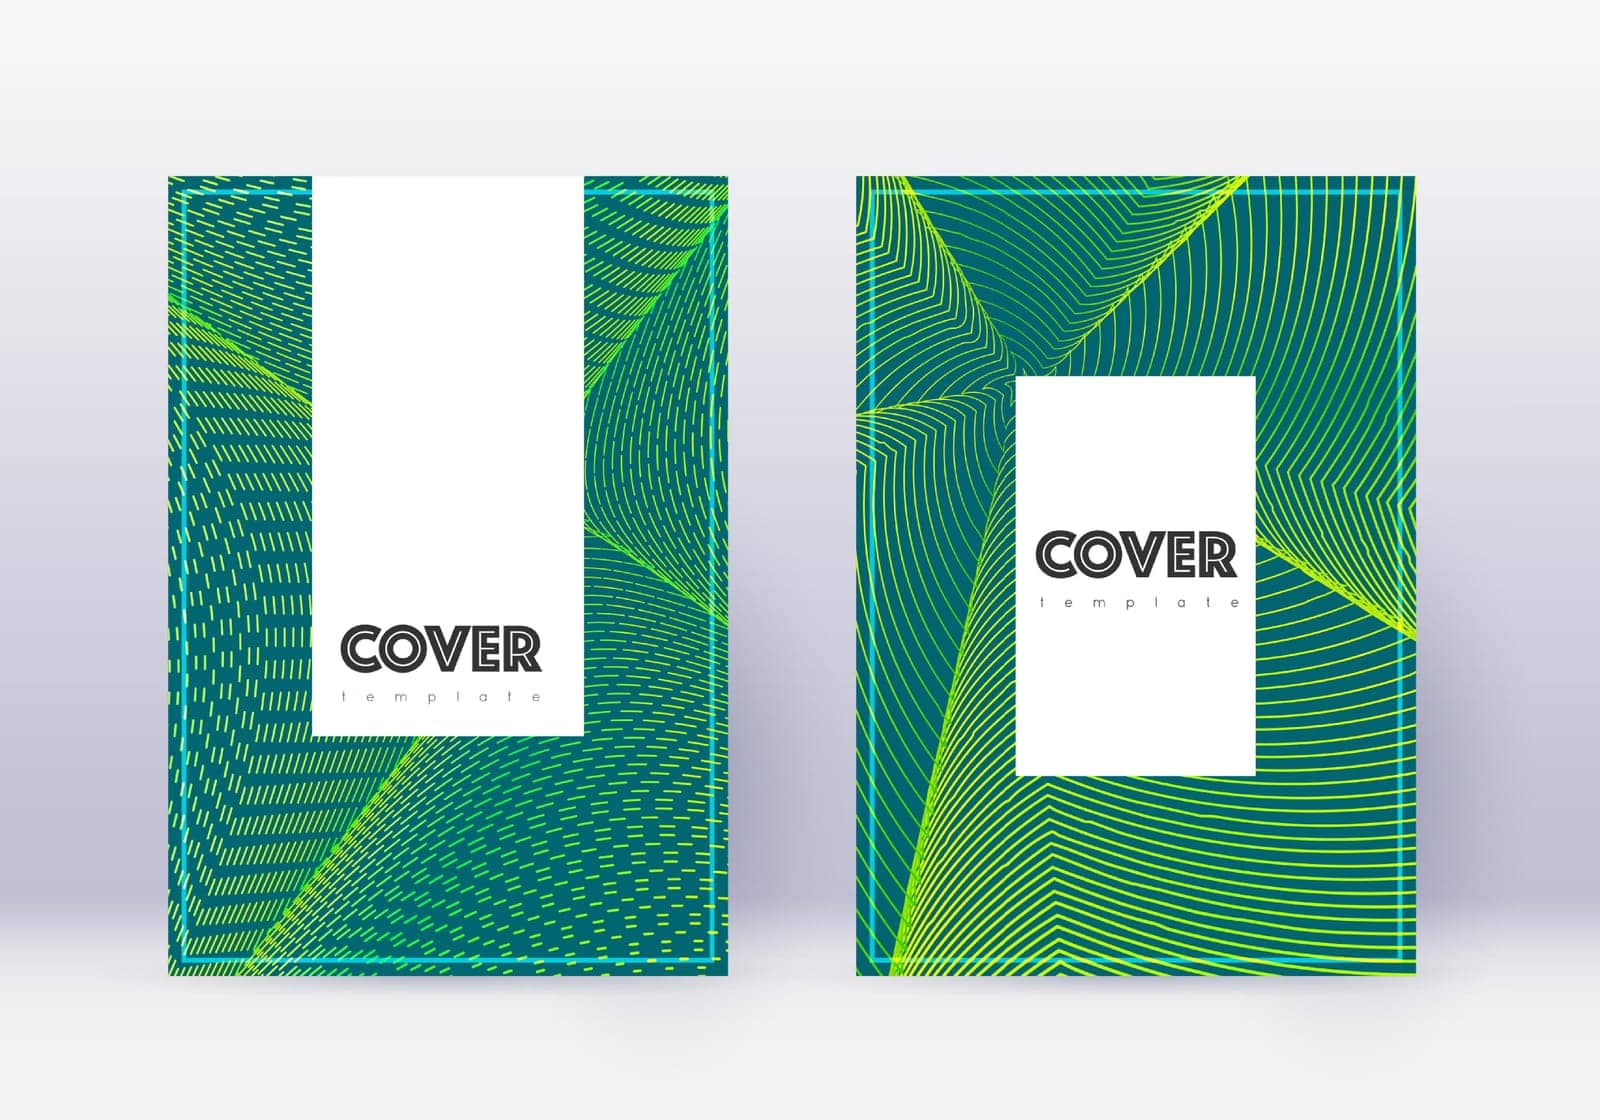 Hipster cover design template set. Green abstract lines on dark background. Charming cover design. Tempting catalog, poster, book template etc.